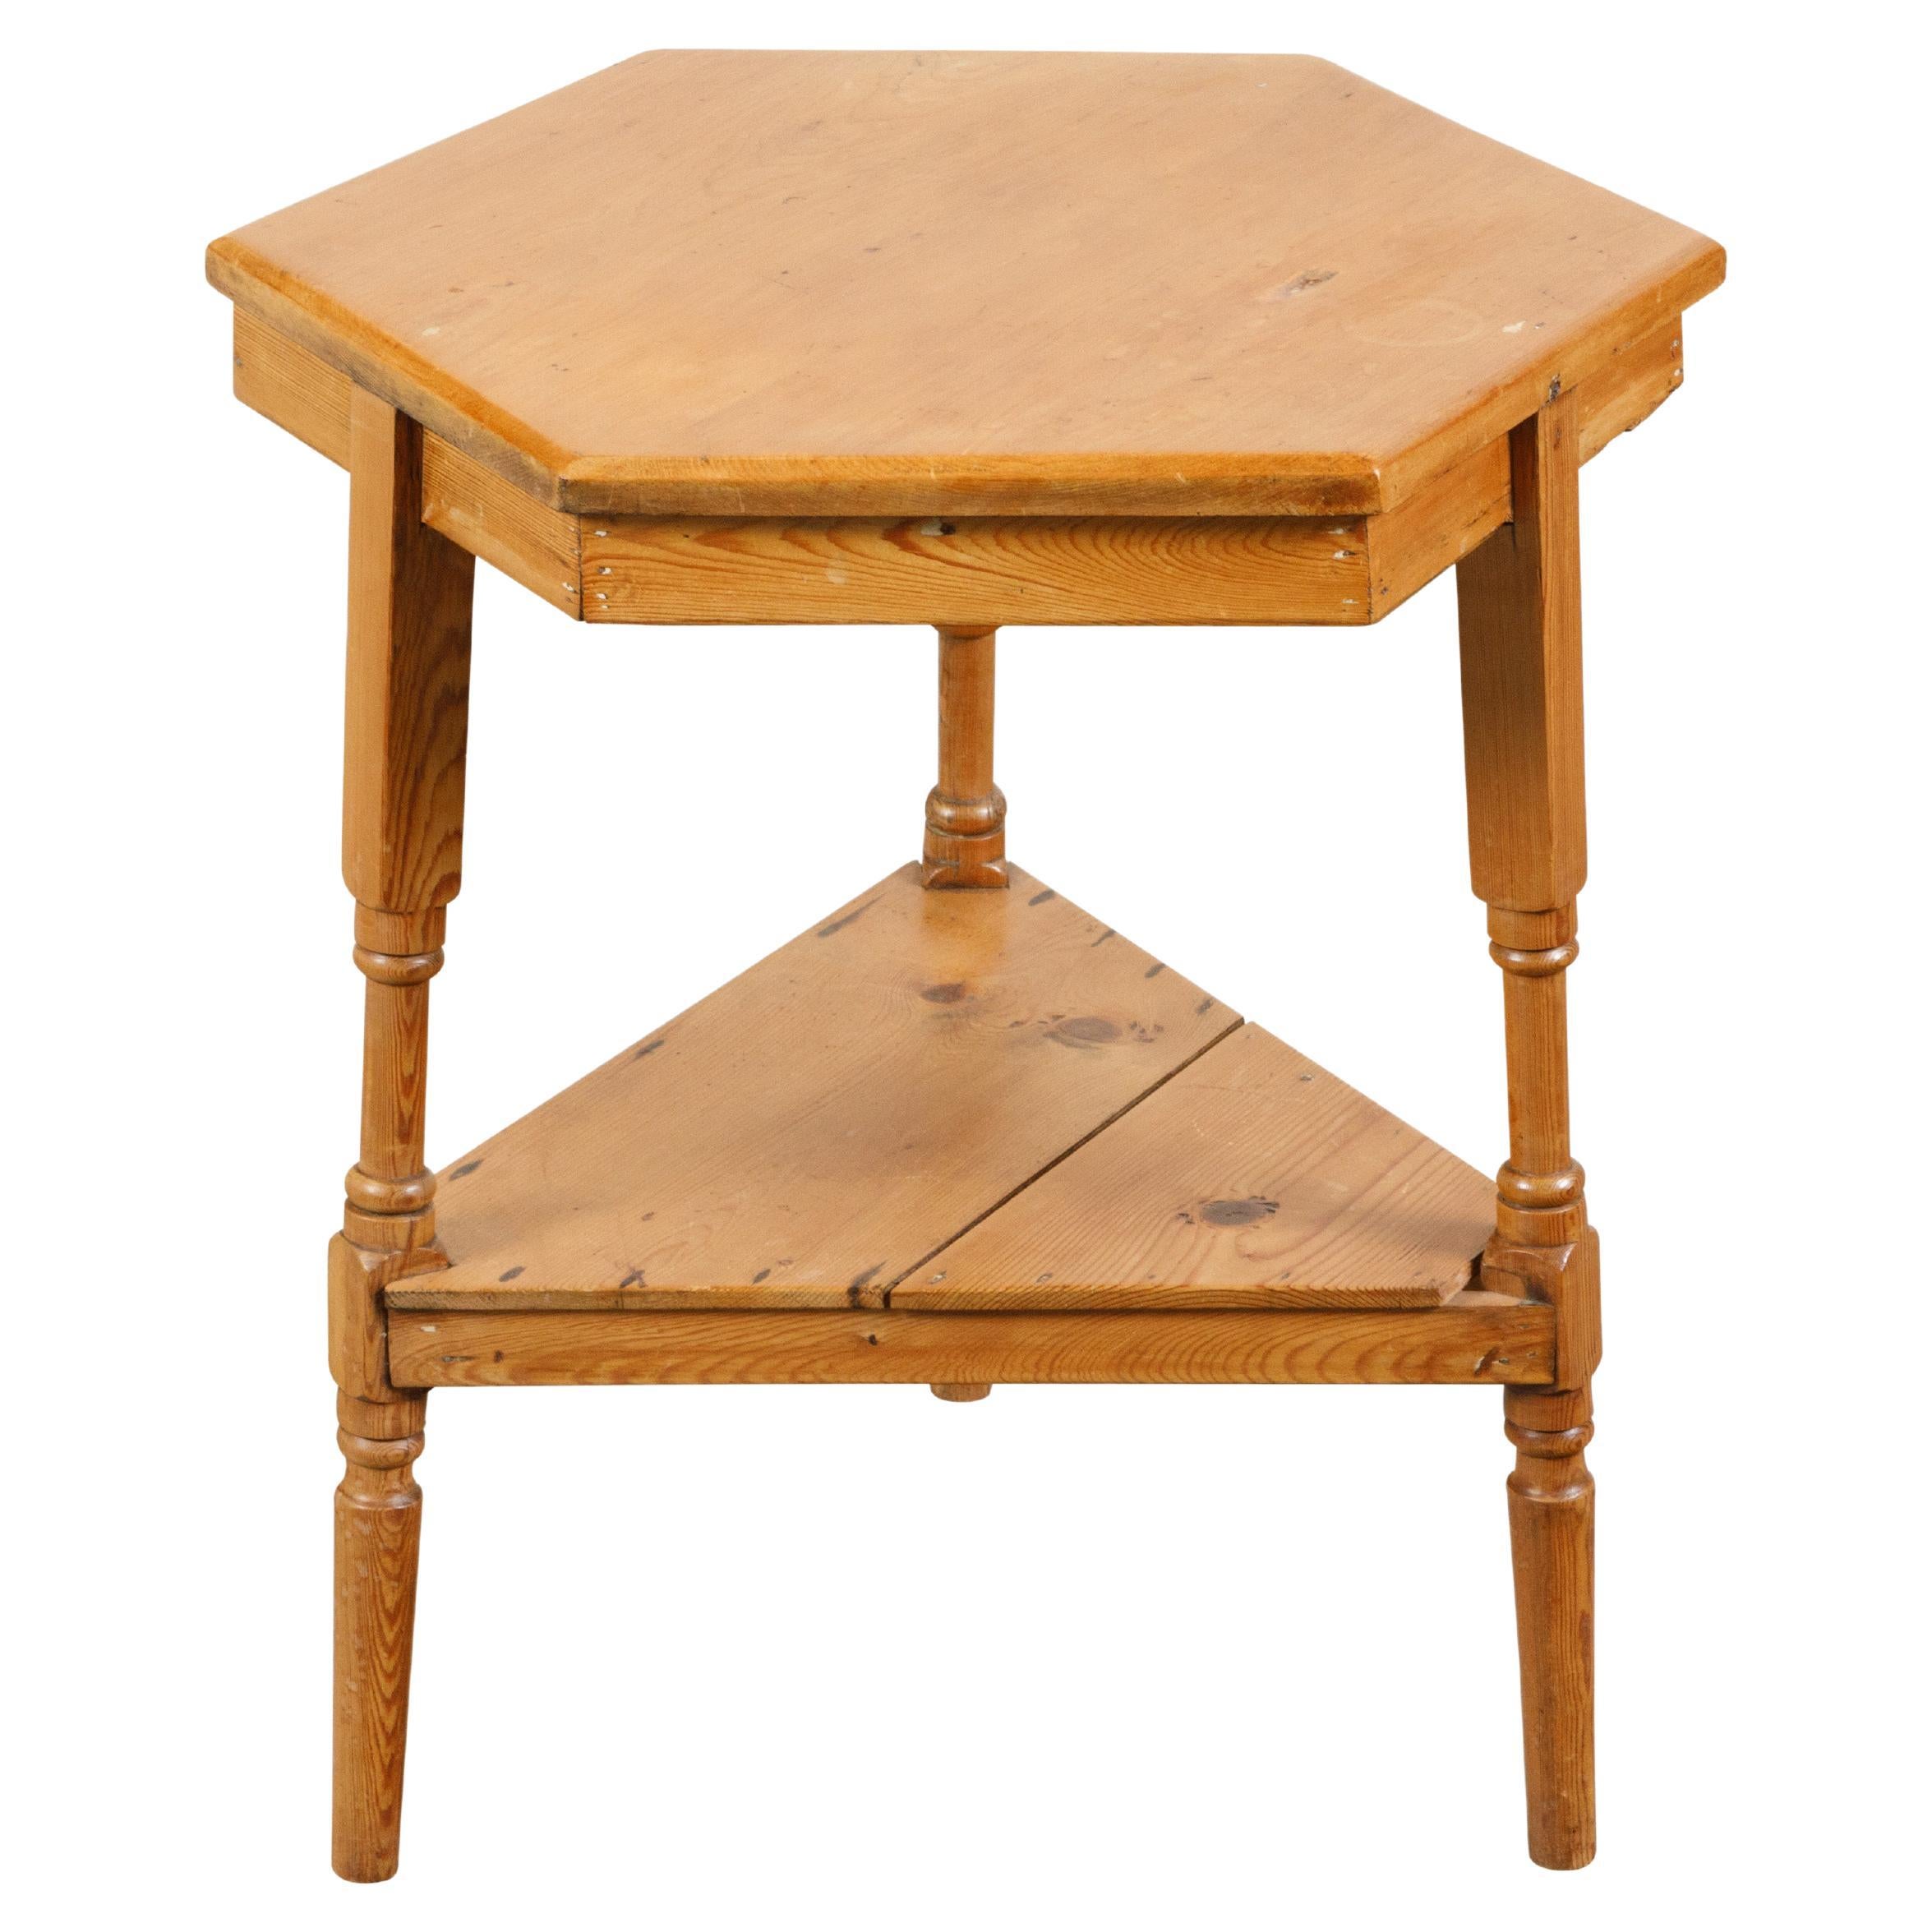 English Midcentury Pine Cricket Table with Hexagonal Top and Triangular Shelf For Sale